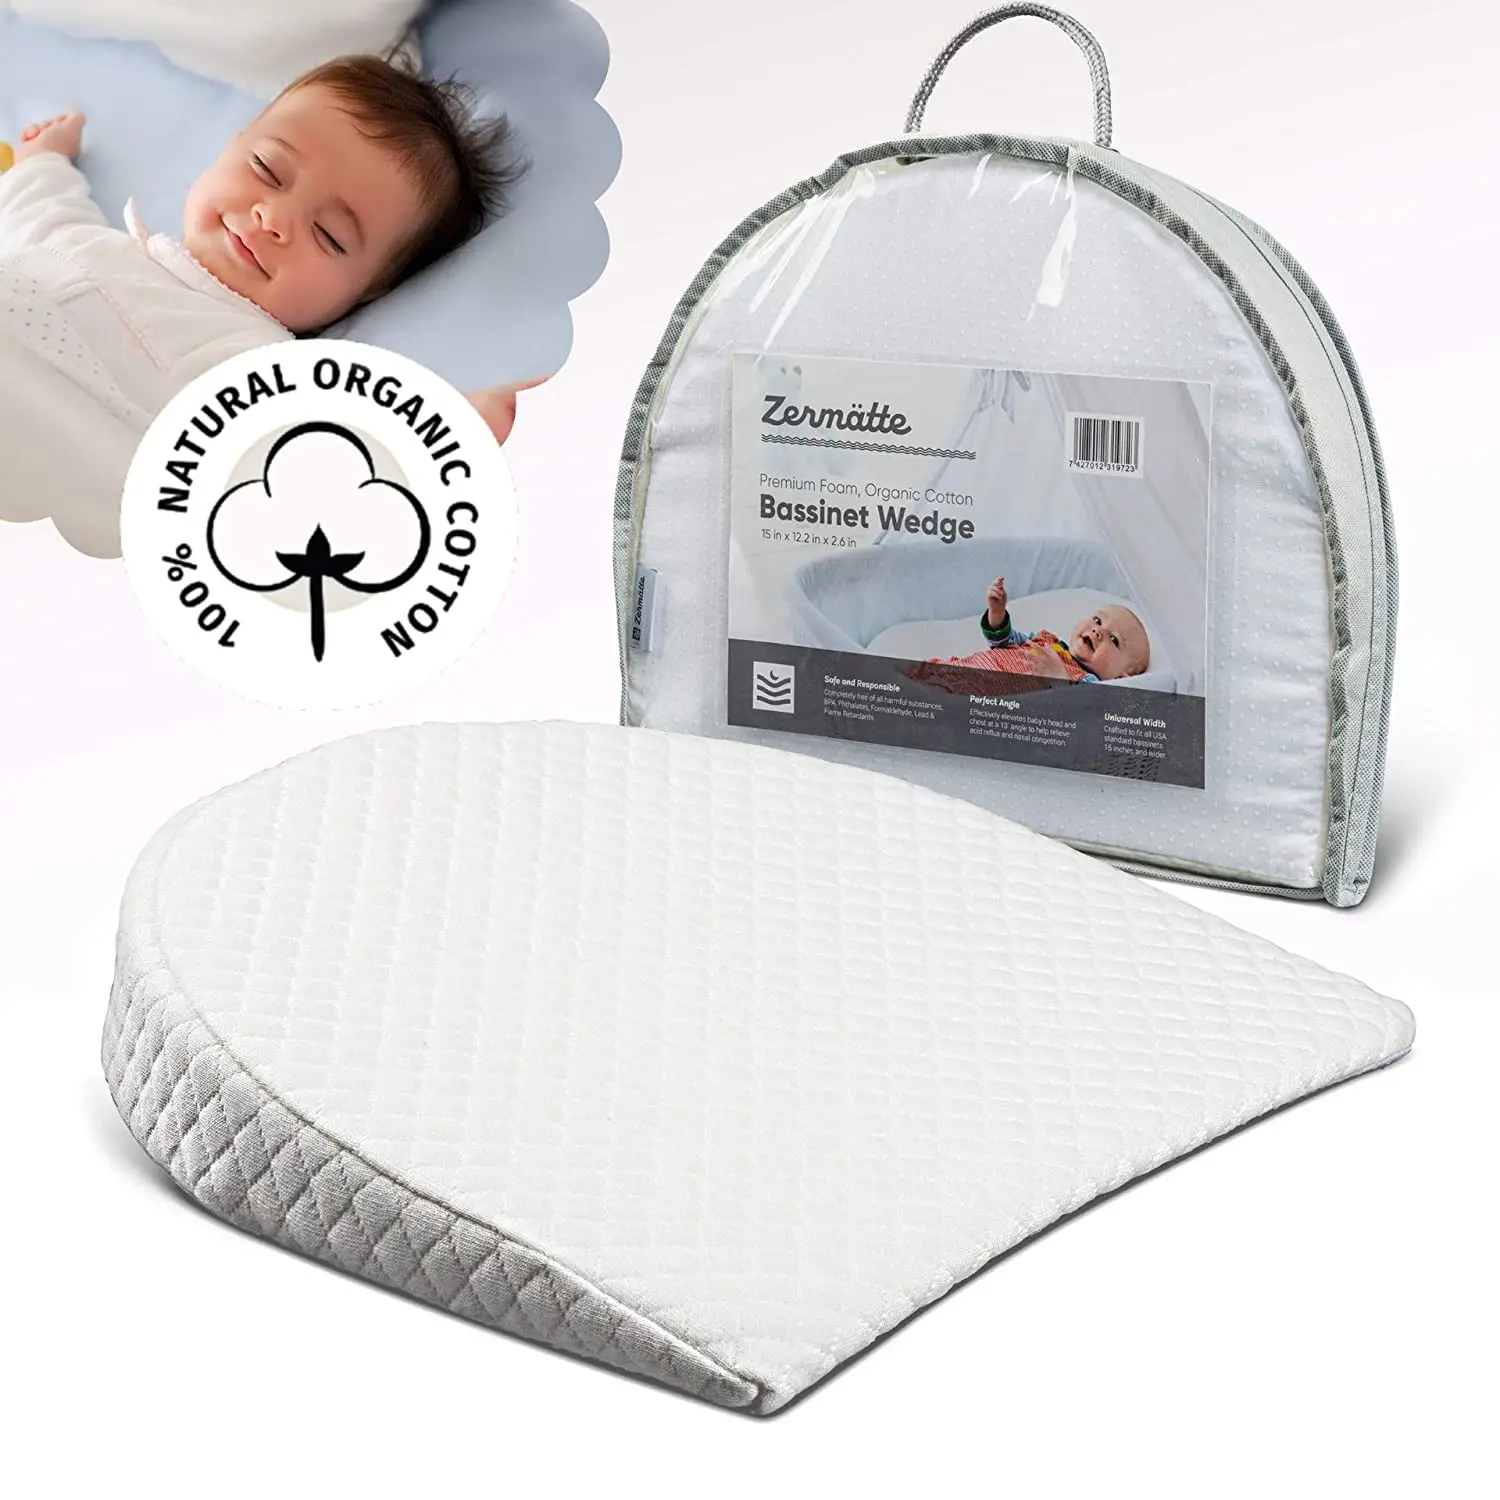 Elevated Sleeping Pillow Helps Babies with Acid Reflux Colic Congestion 3-in-1 Universal Crib Wedge Adjustable Cushion Supports Healthy Sleep and Eating Carrying Case by Did and Me 